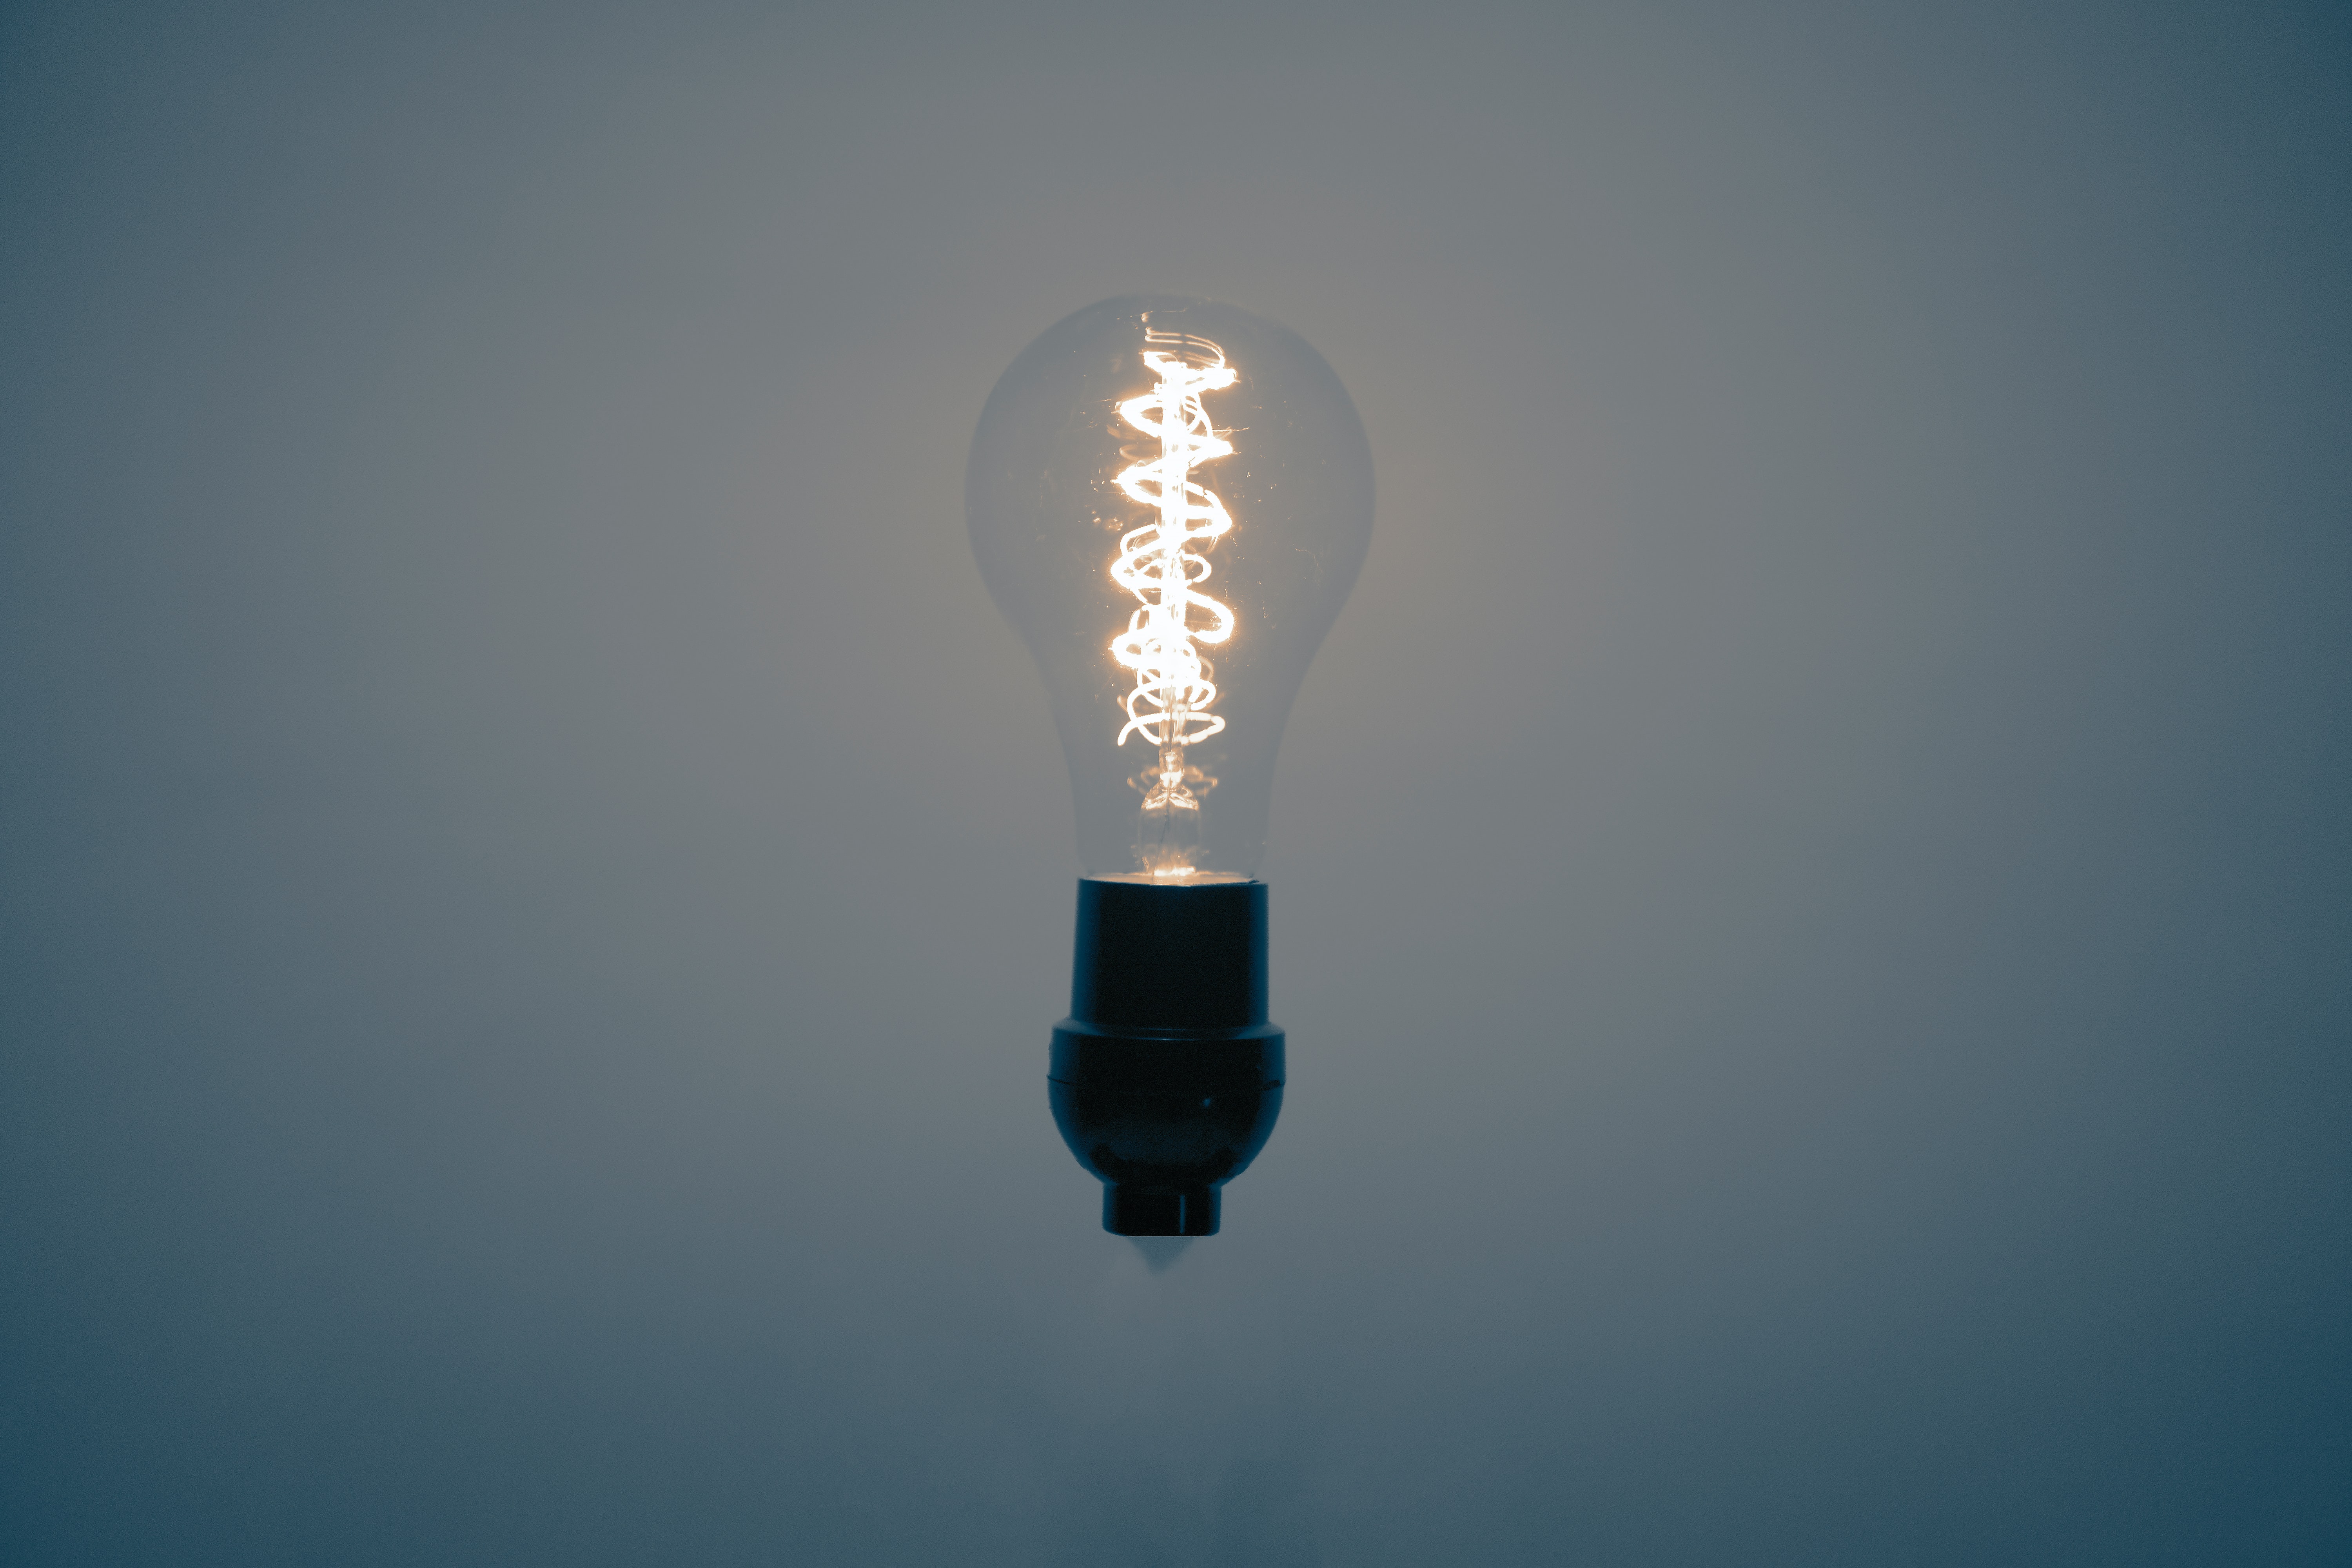 Lightbulb on a white background with a blue background. The lightbulb has a yellow light coming out of it.